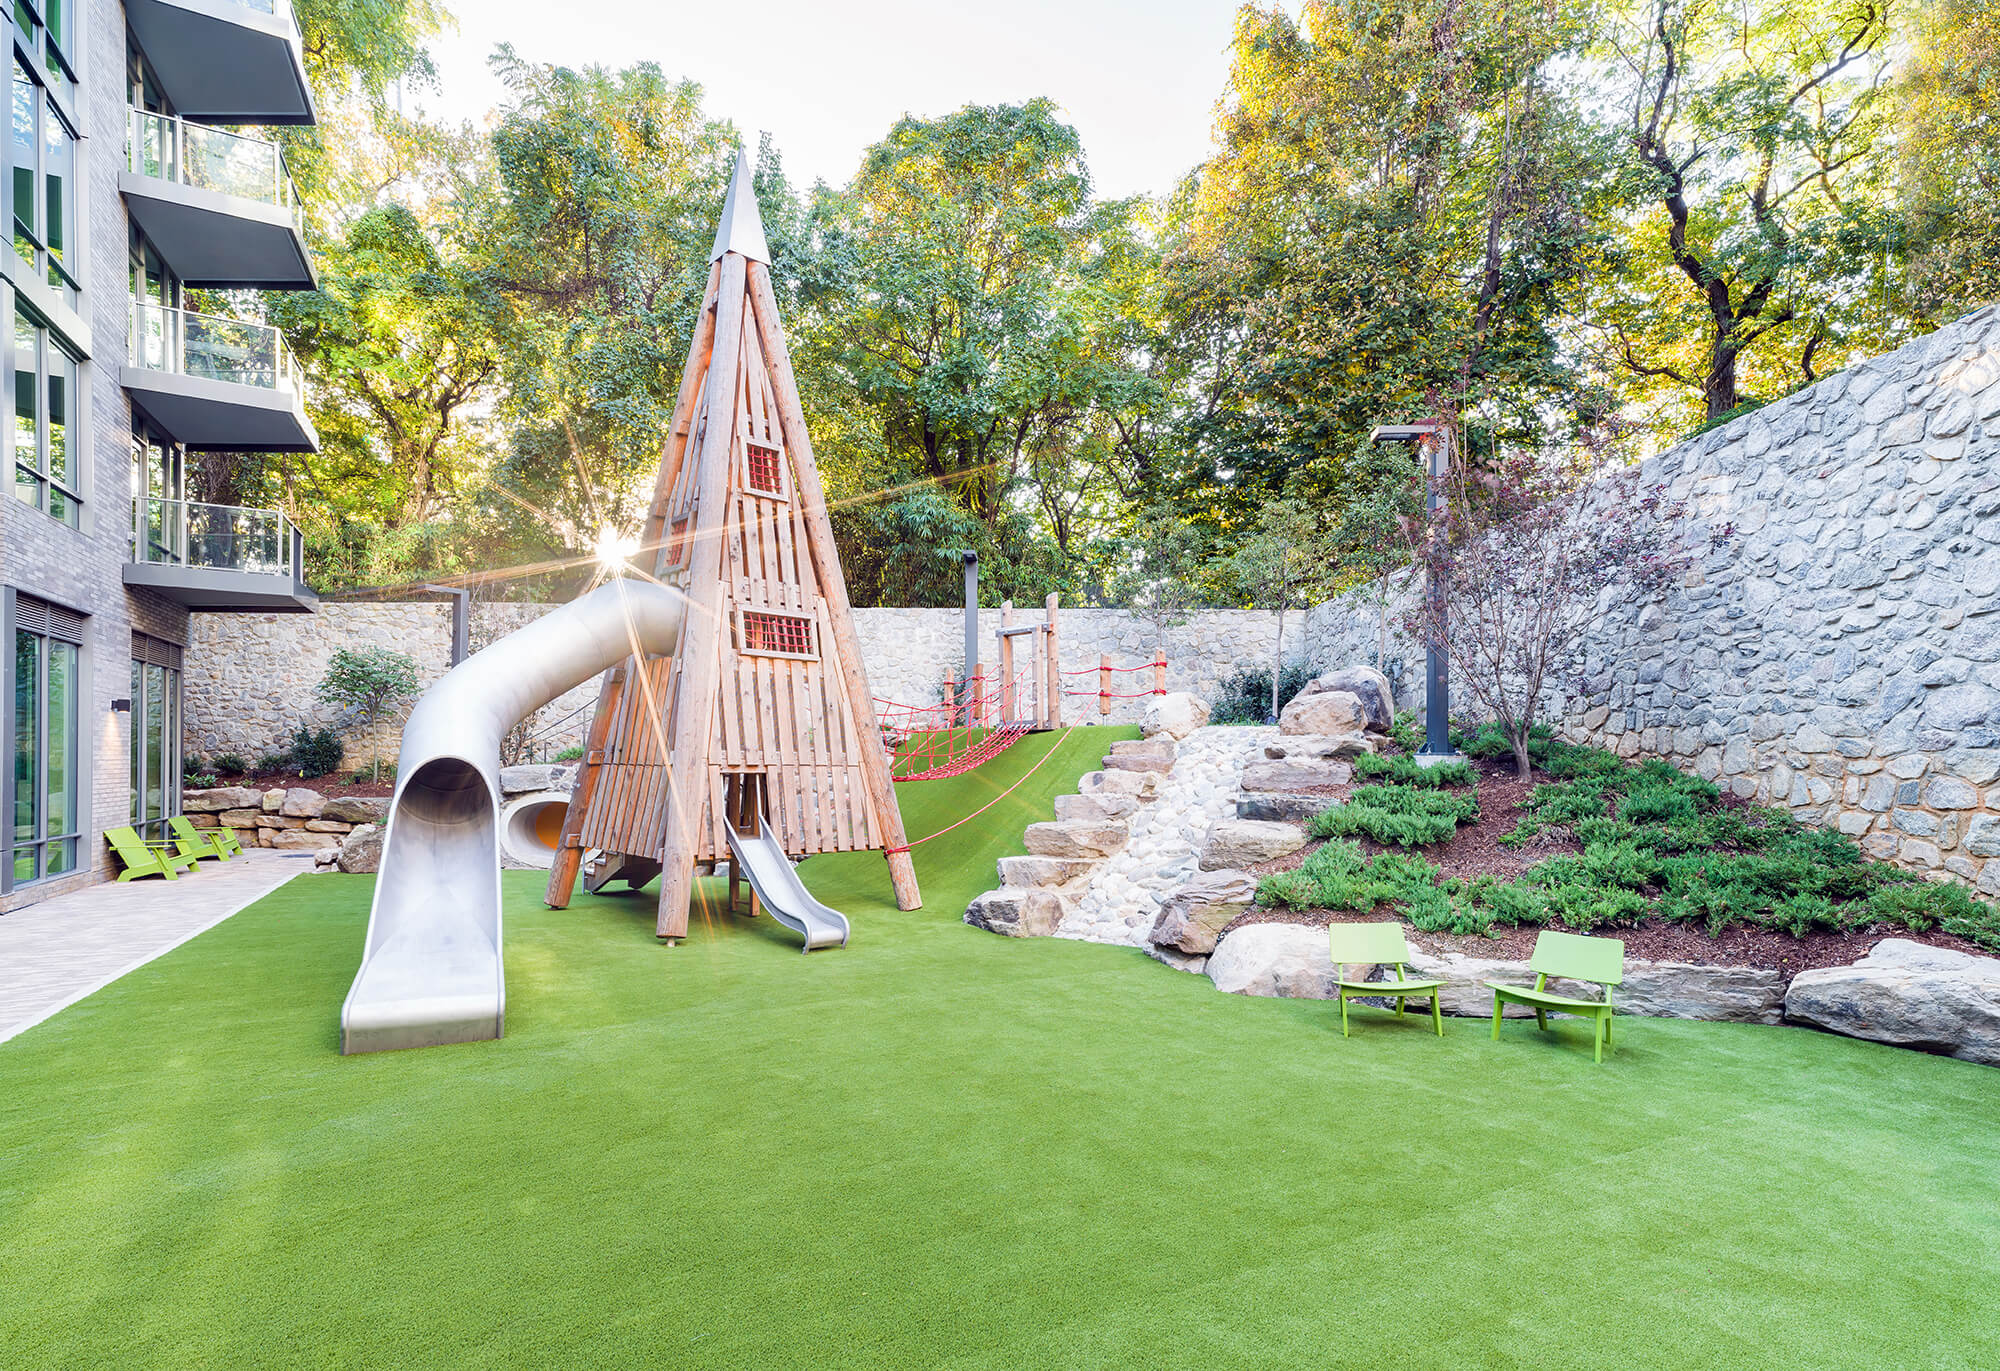 Enjoy private playtime at the exclusive Pin Oak Park, a nature-inspired playground